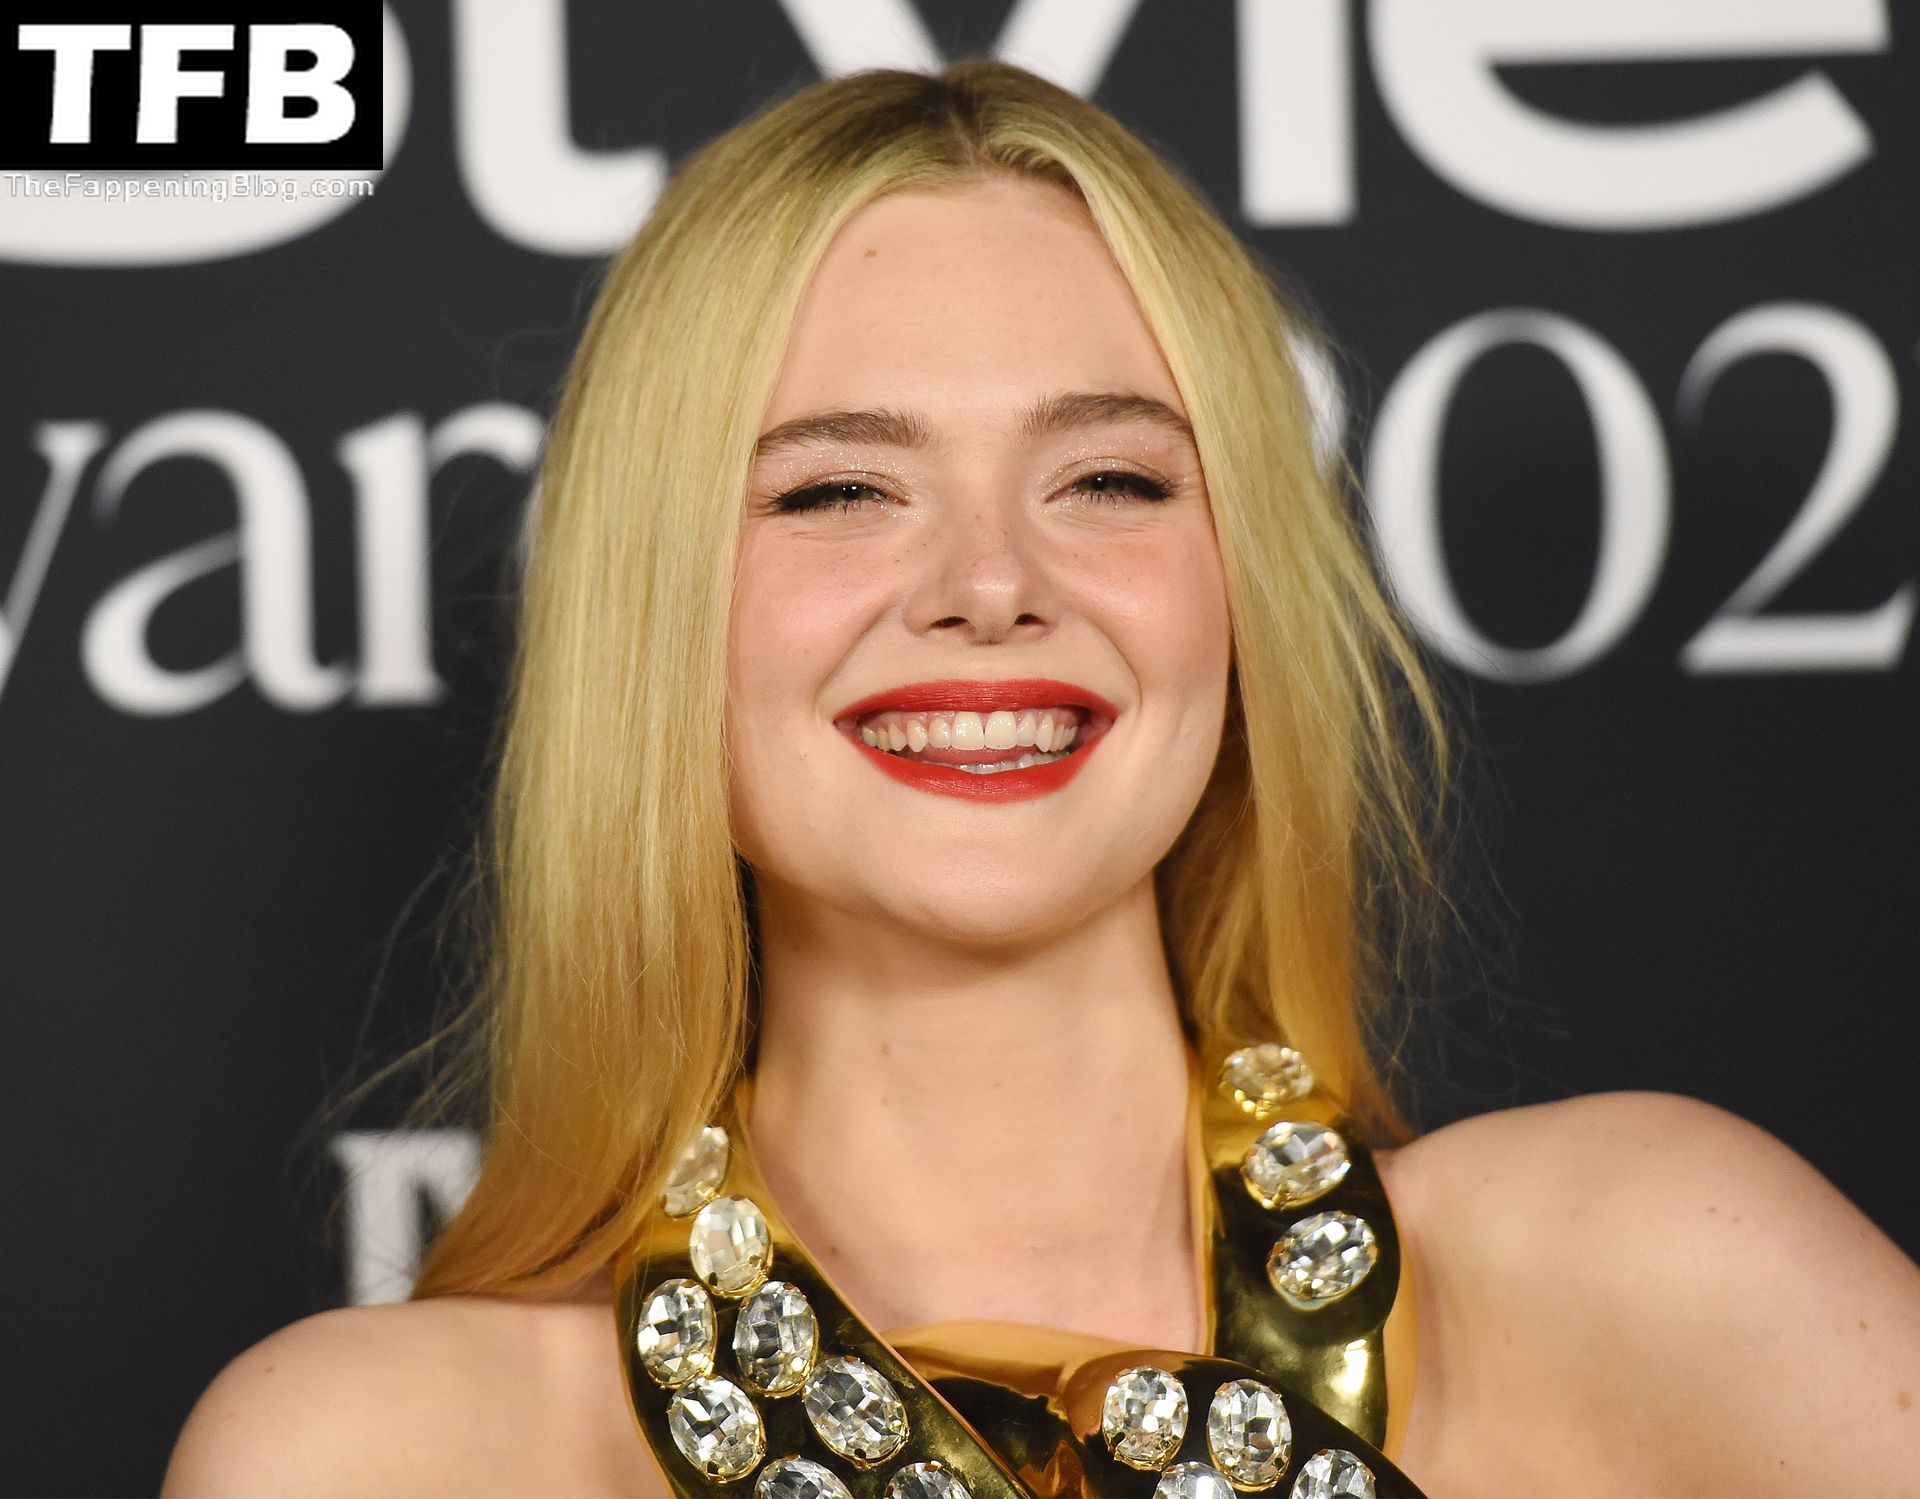 Elle-Fanning-Sexy-Braless-The-Fappening-Blog-74.jpg